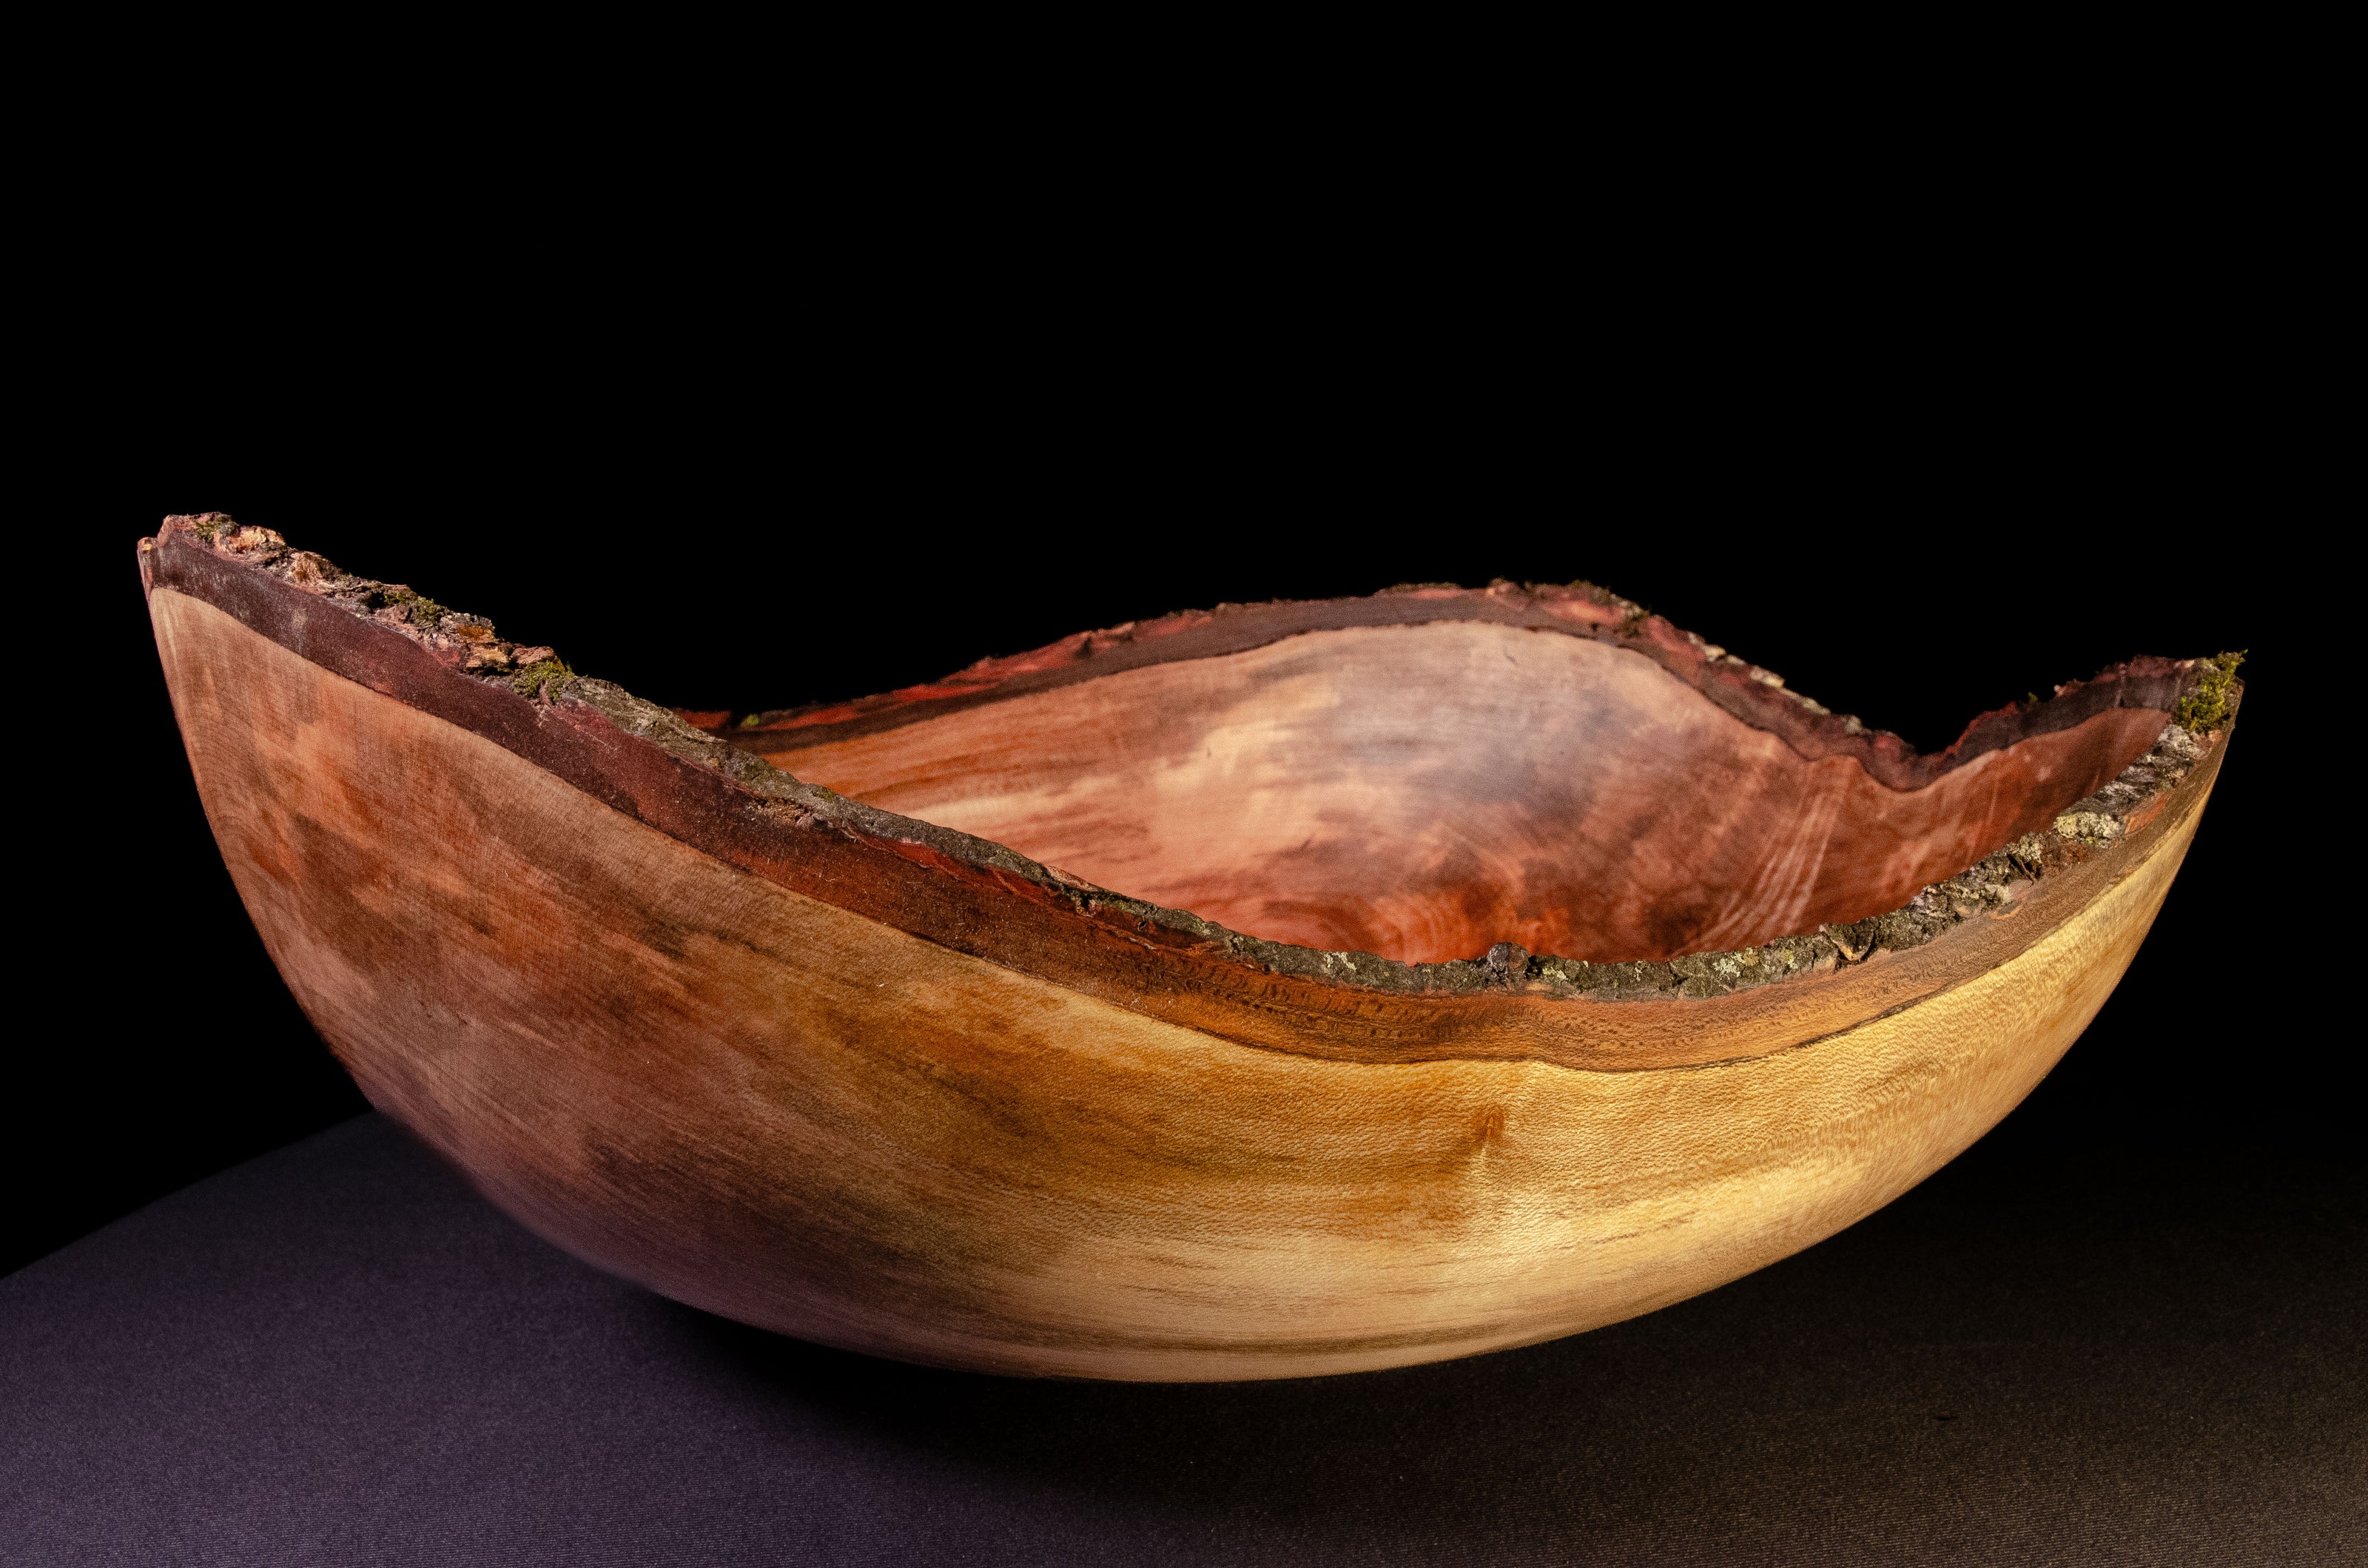 Shallow bowl with natural edge and striking crotch figure. Exquisite display, gift, or centerpiece.